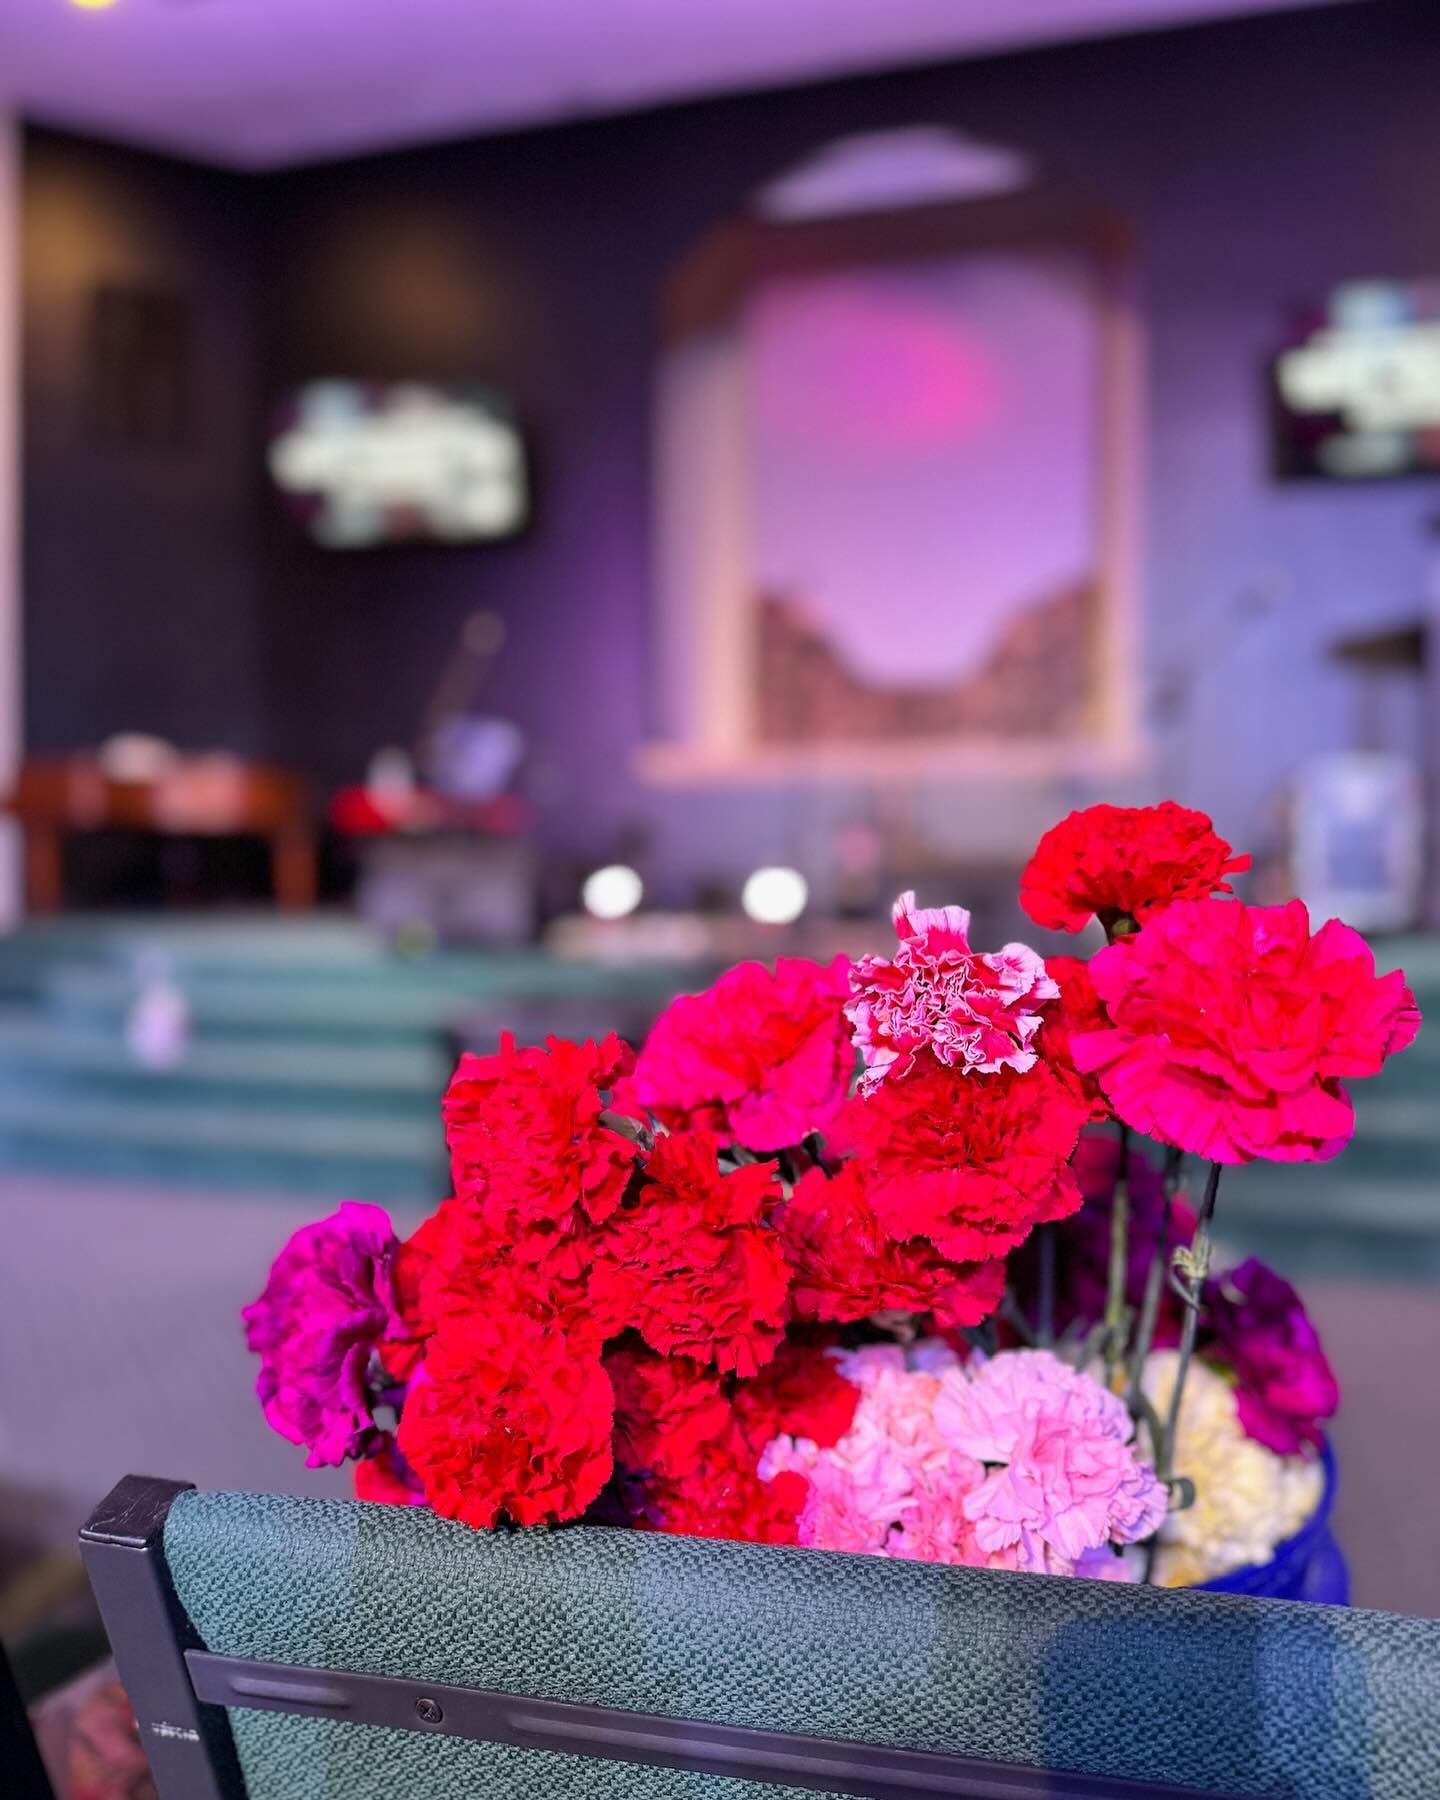 It was a beautiful Sunday at Hope City for Mother&rsquo;s Day, and we had such a sweet time in the presence of the Lord. We are thankful for what He&rsquo;s done and believing with expectancy for what He&rsquo;s going to do. 🖤🕊️

Have a great week!